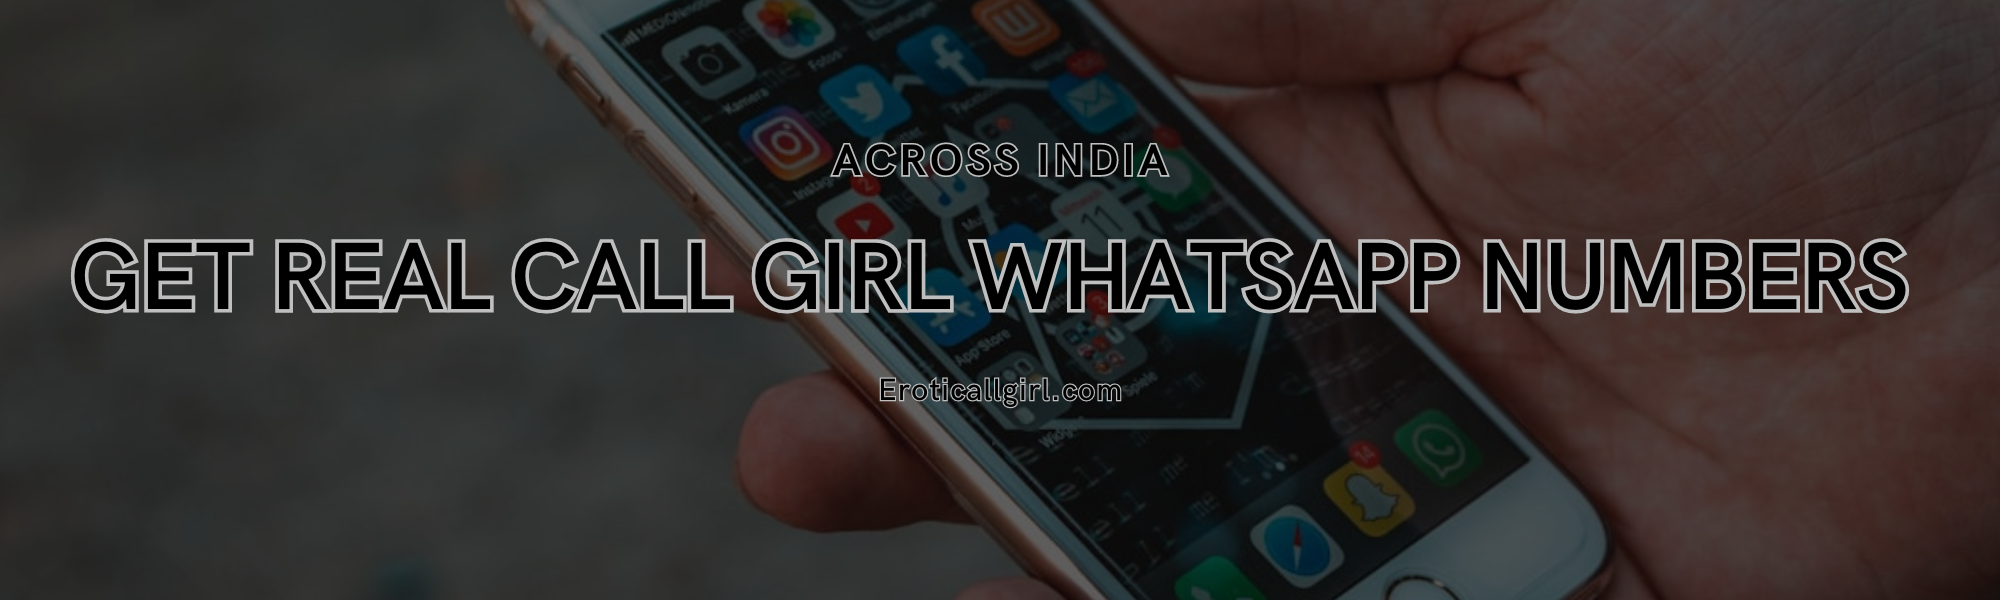 Get Real Call Girl WhatsApp Numbers Across India